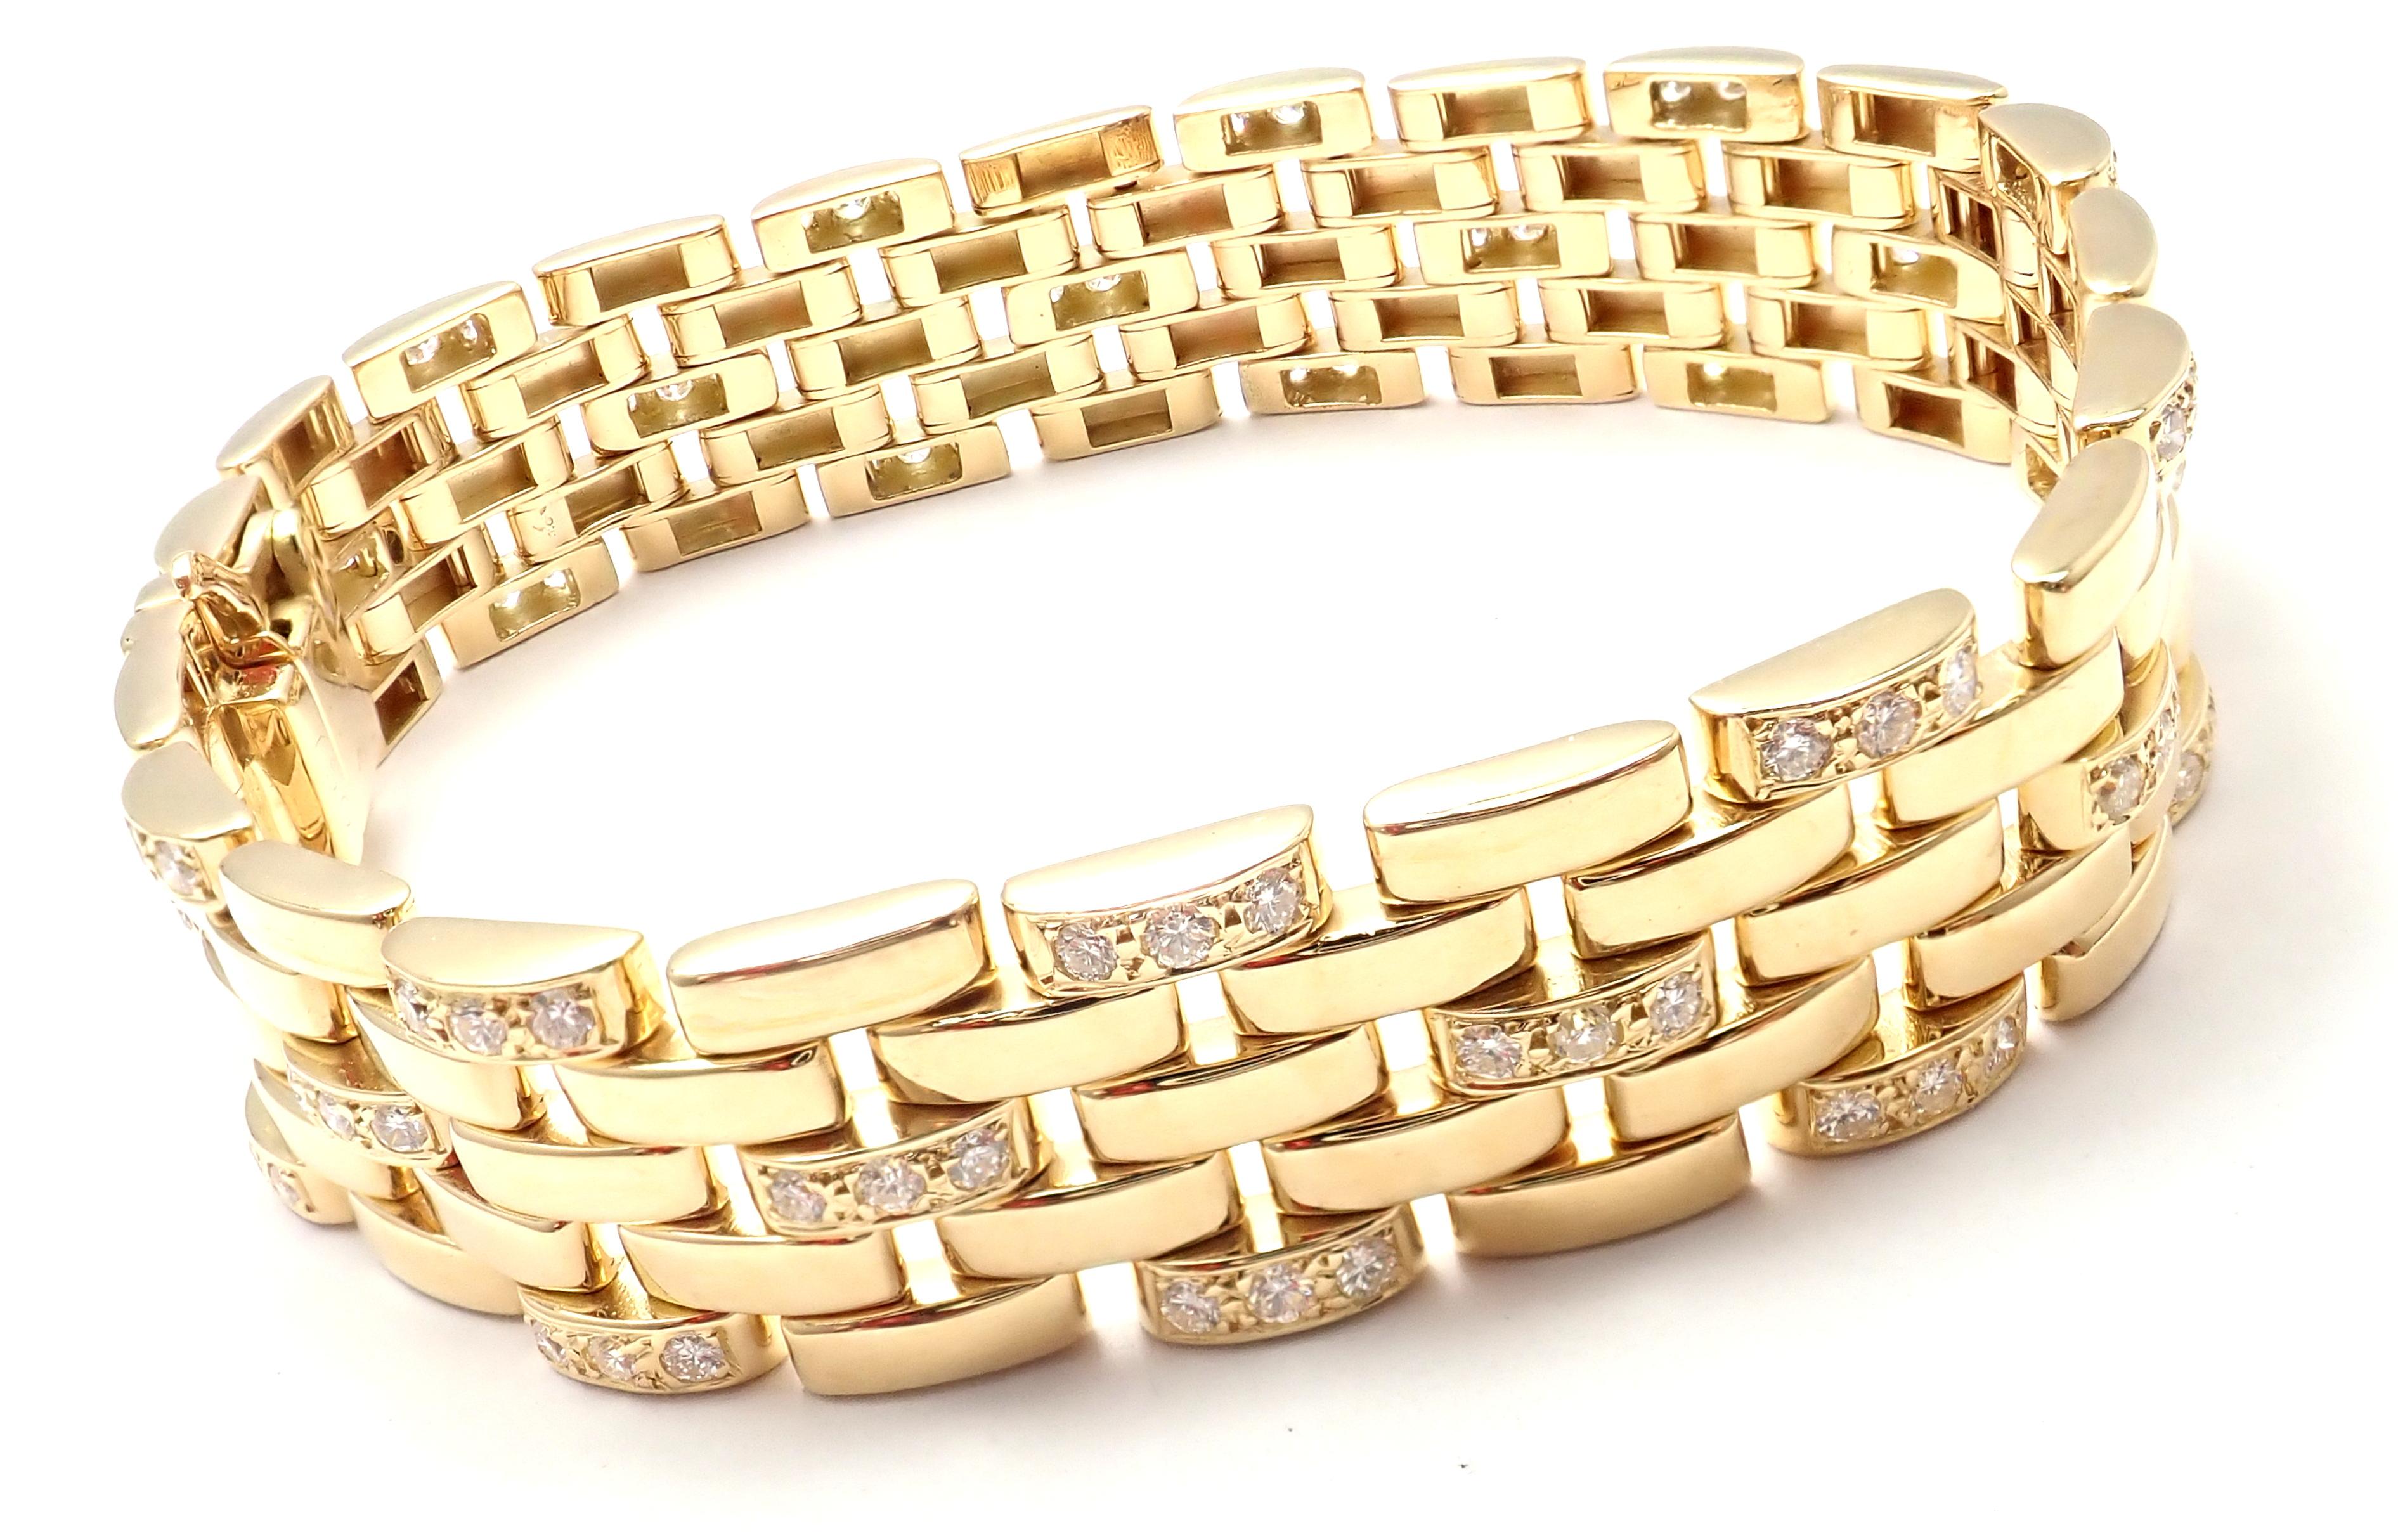 18k Yellow Gold 5 Row Maillon Panthere Diamond Link Bracelet by Cartier. 
With 104 round brilliant cut diamonds VVS1 clarity, E color total weight 
approximately 3.12ct
This bracelet comes with Cartier service paper and a Cartier